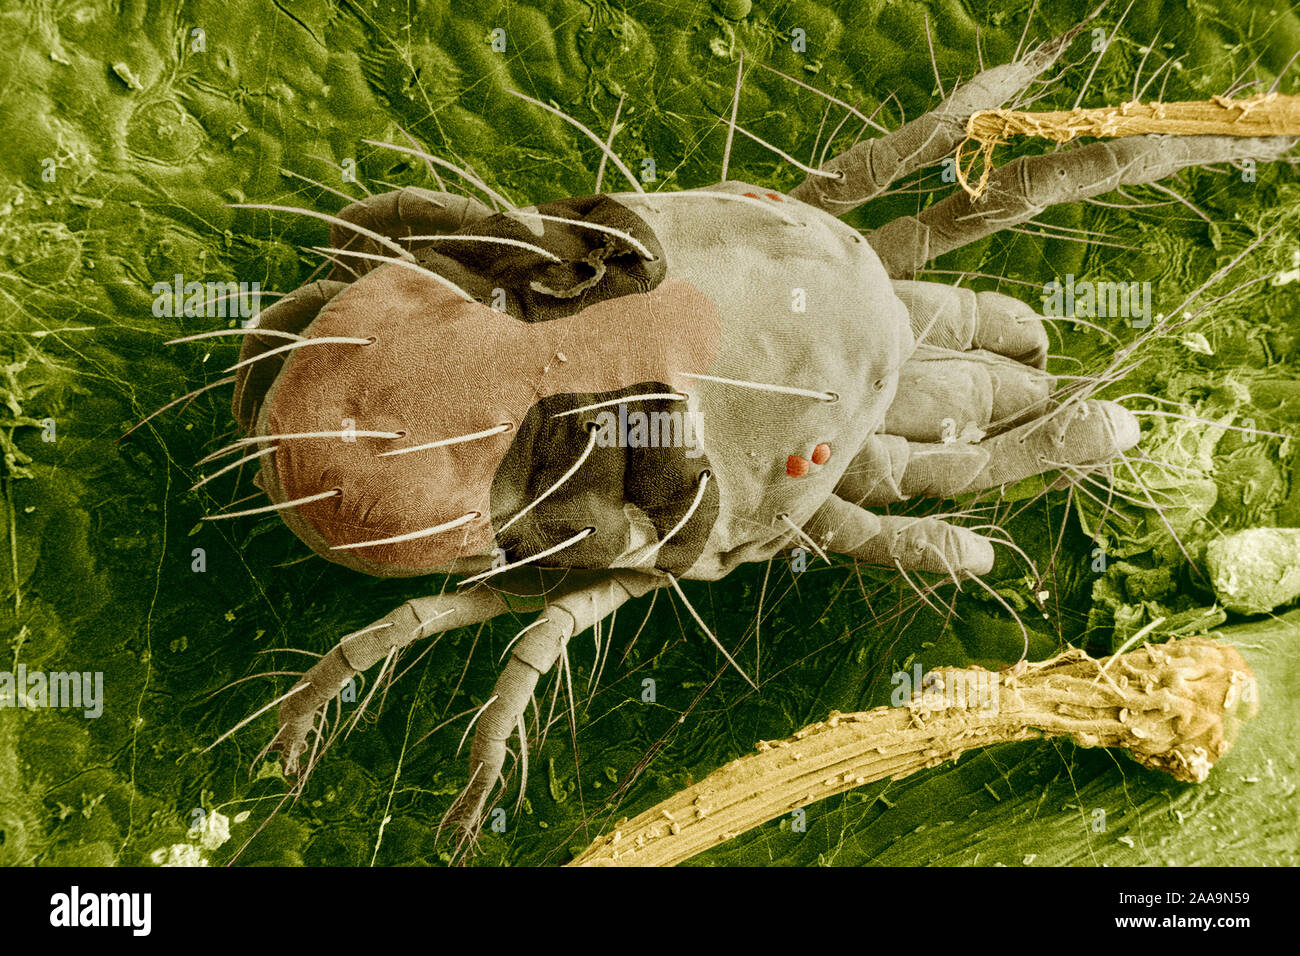 The two-spotted spider mite, Tetranychus urticae, is one of the most common mite species of agricultural importance. If you see fine spider webs on your house plants, you probably have spider mites. Stock Photo